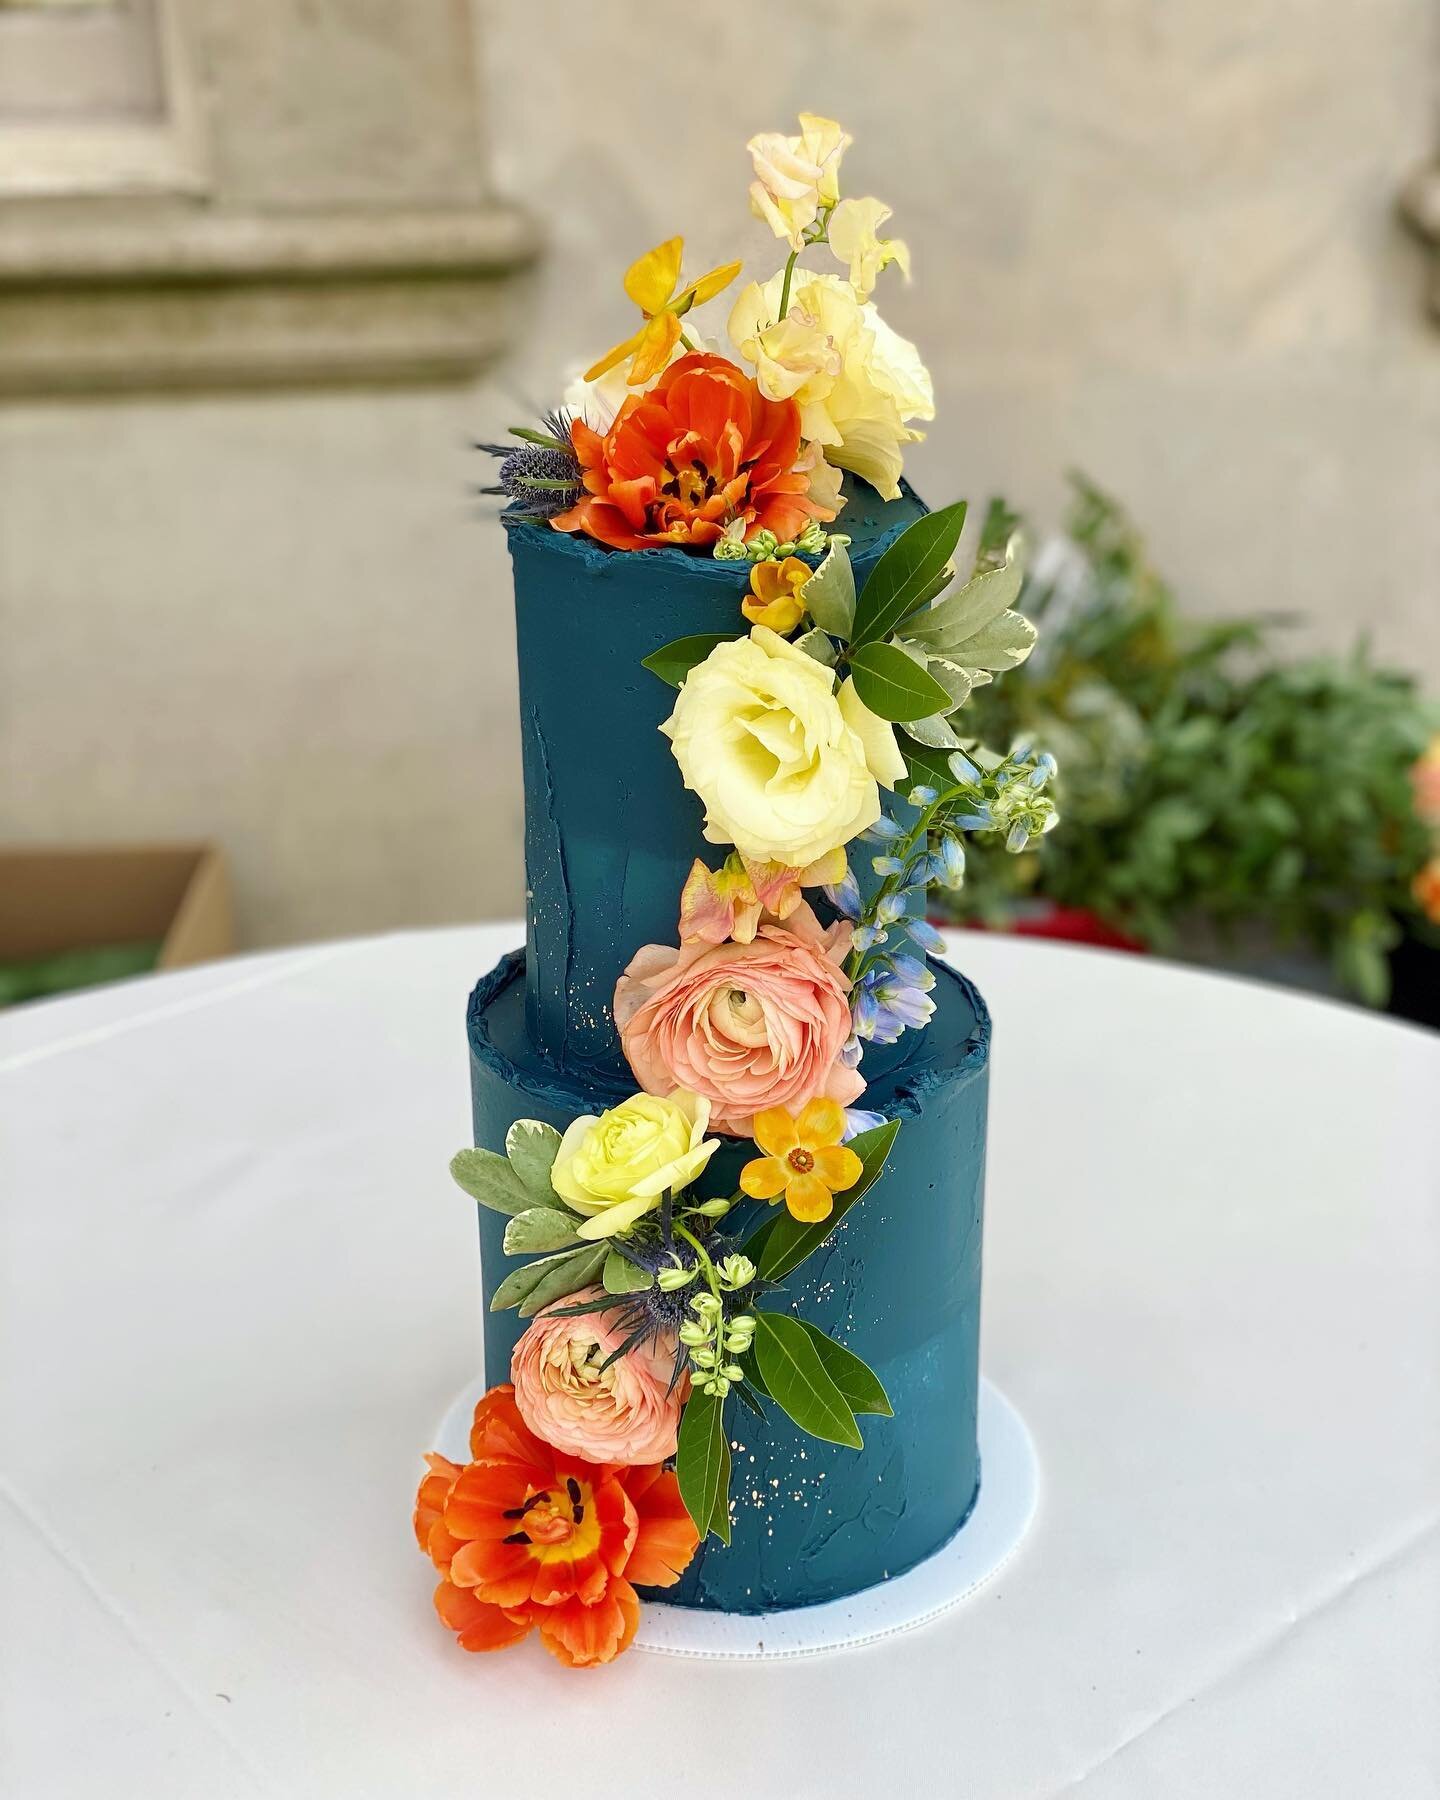 I love adding florals to already stunningly gorgeous cakes!  The pops of color against this beautiful blue are what dreams are made of!

I can&rsquo;t wait to share more of this styled shoot at @atlantahistorycenter hosted by @catherinehurtphoto 

Ca